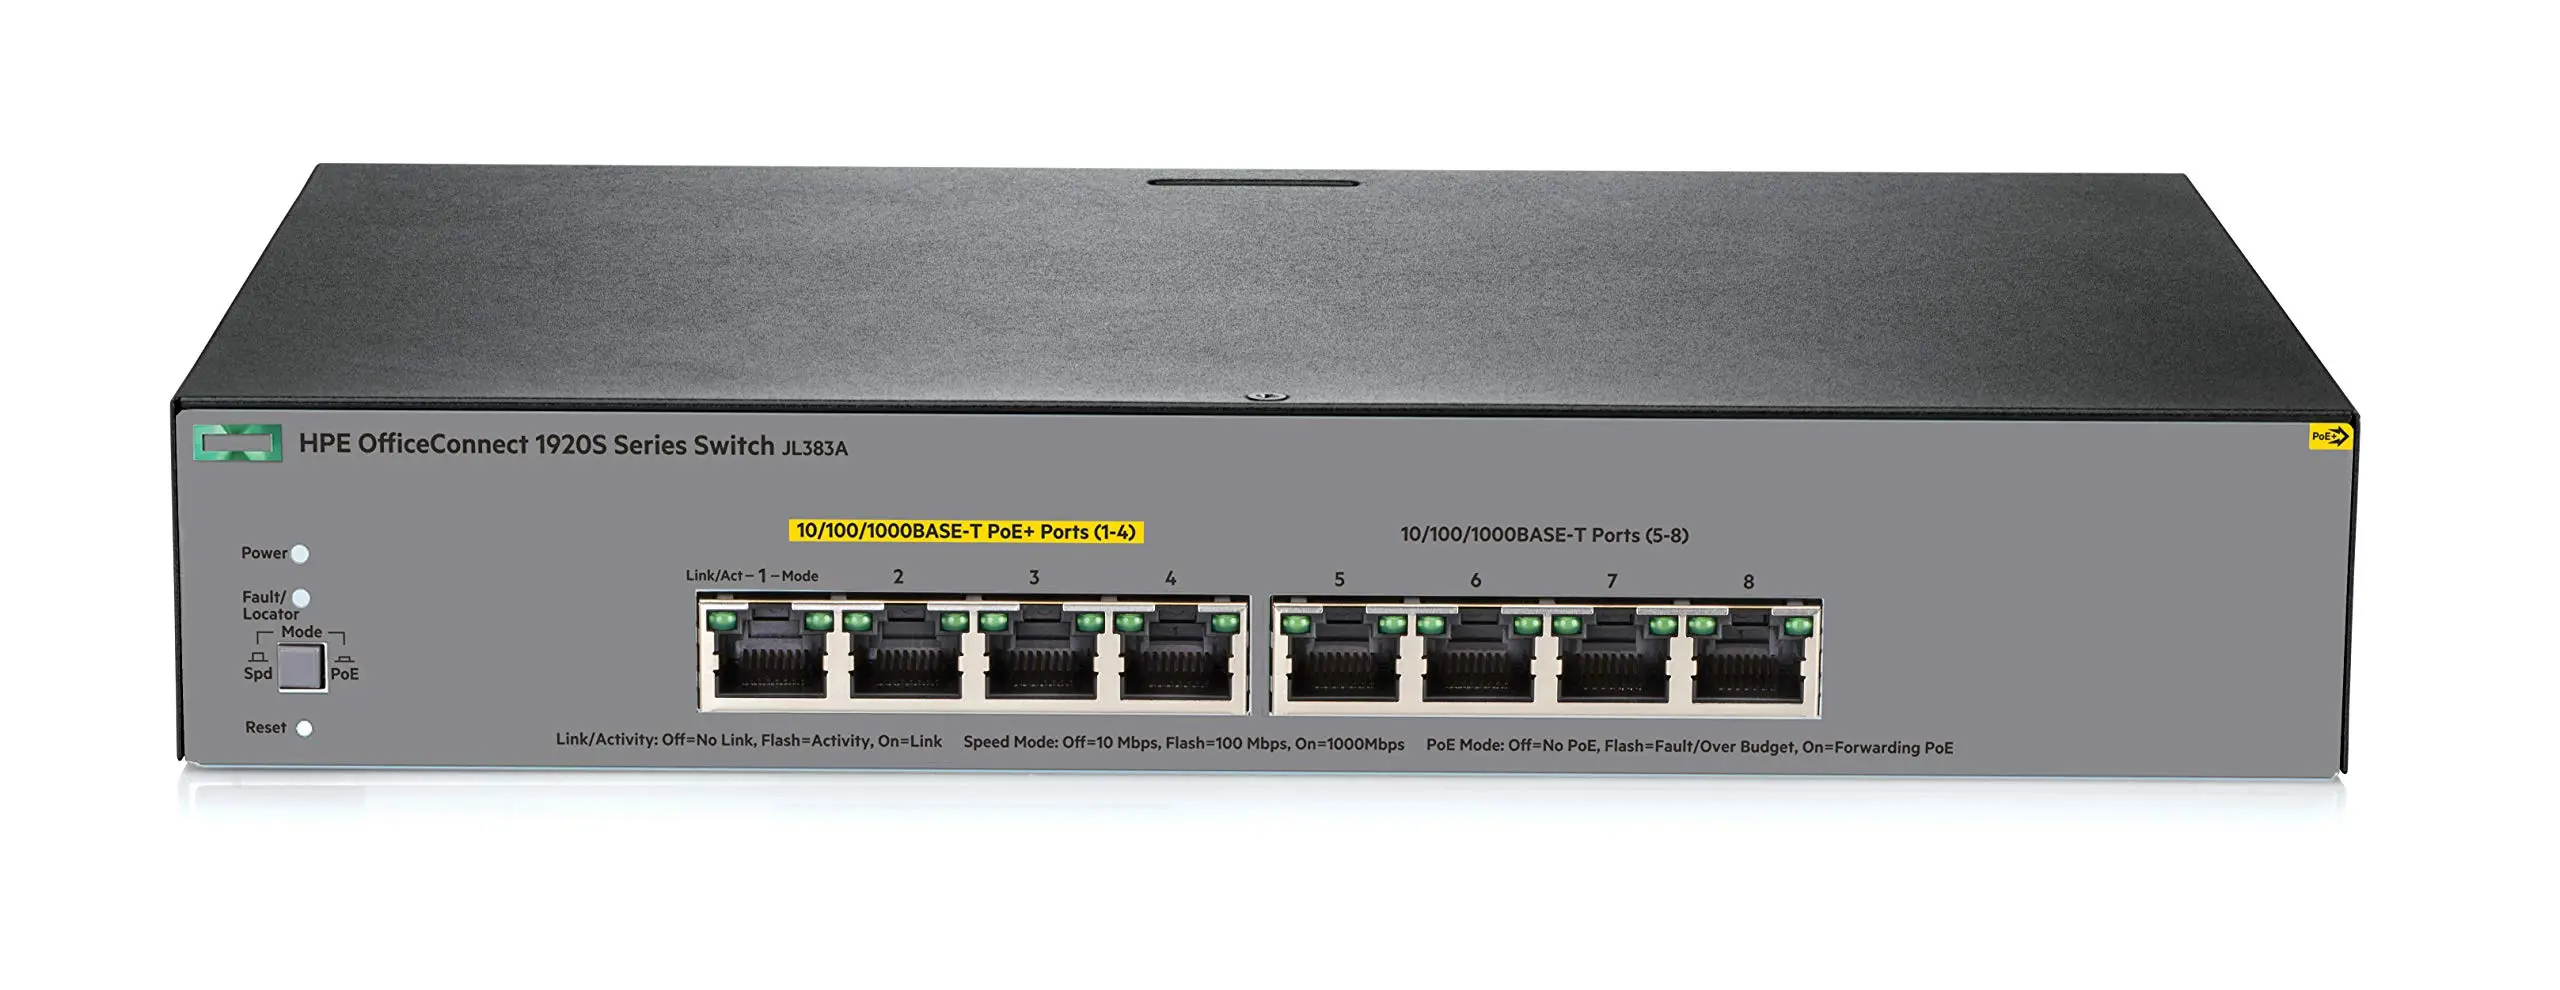 hewlett packard enterprise officeconnect 1920s - What is the default password for HPE Officeconnect switch 1920s